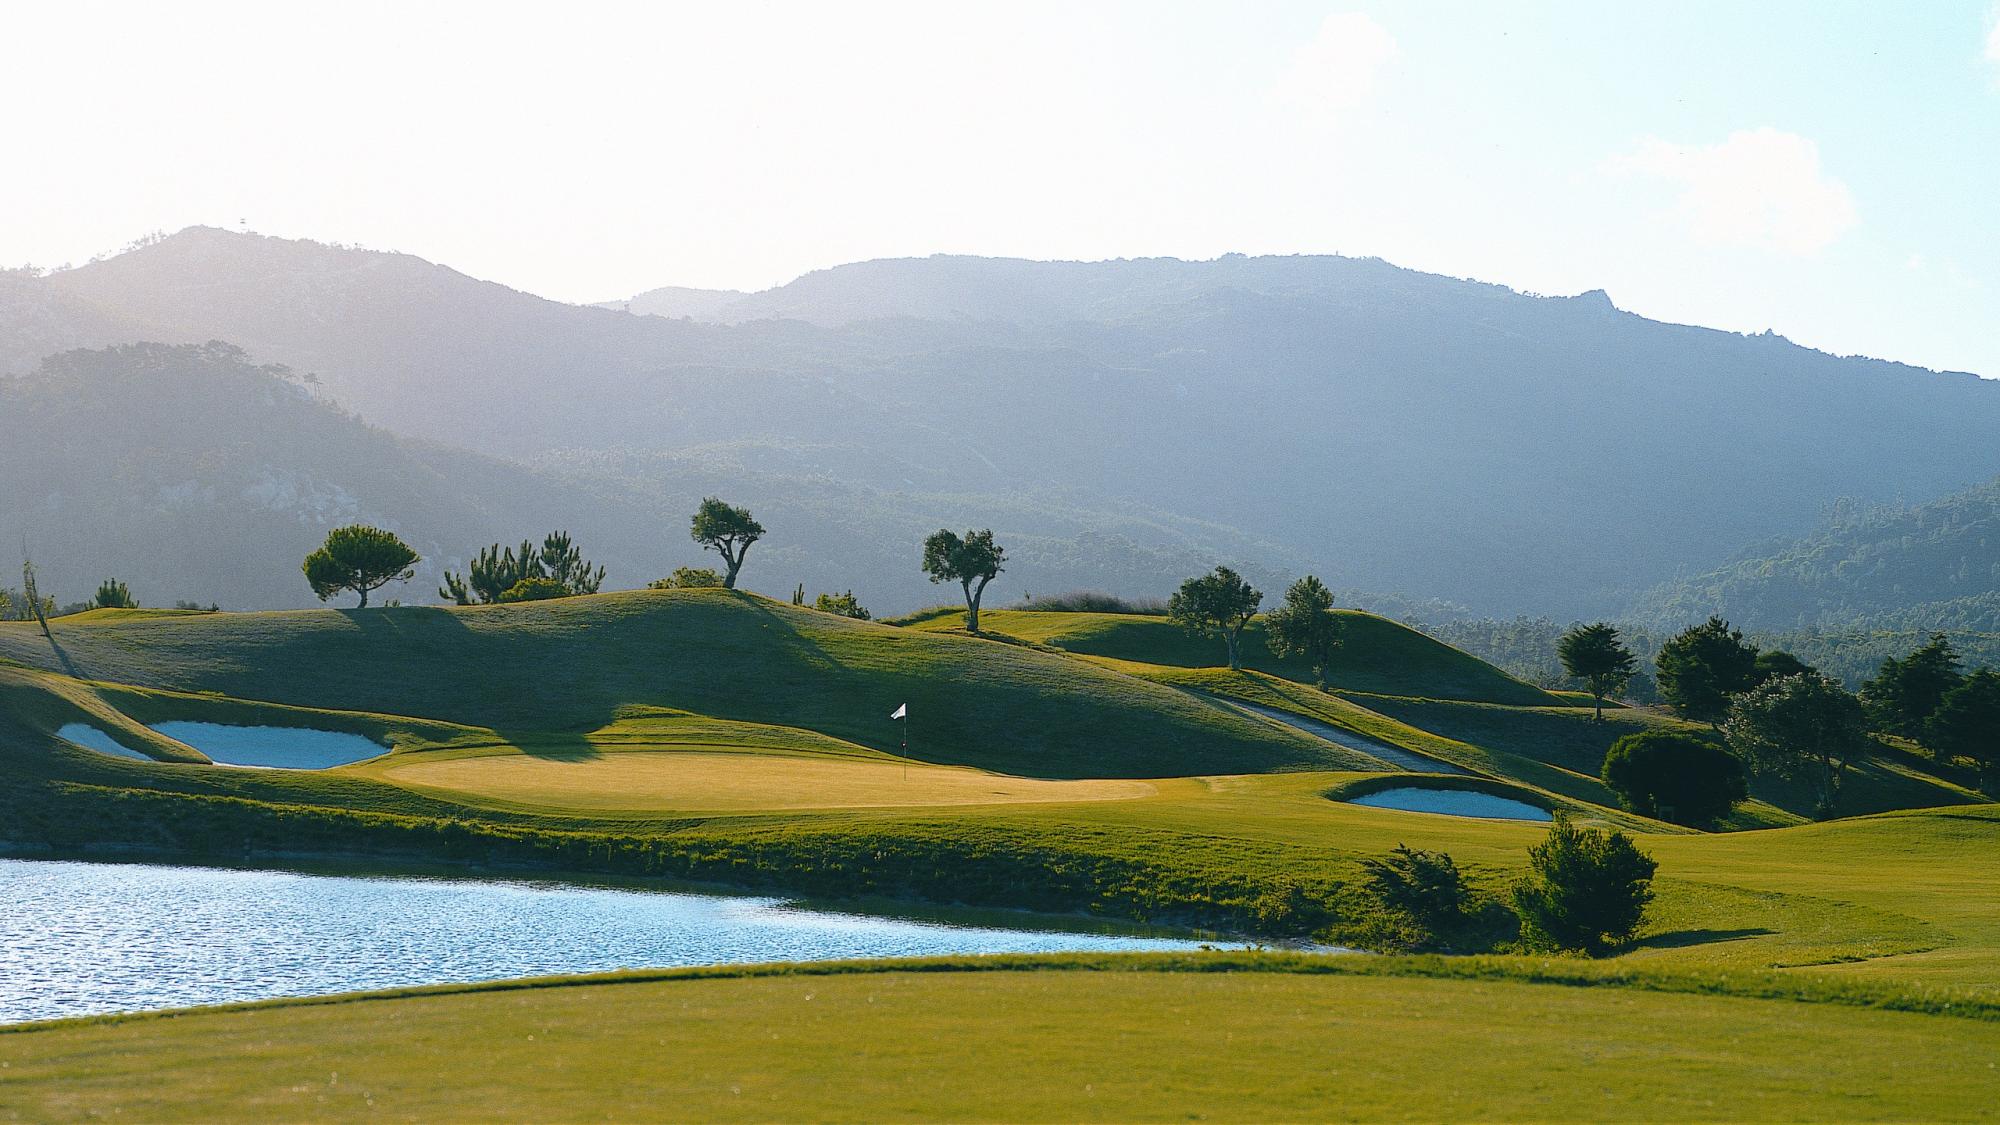 The Penha Longa Atlantic Golf Course's picturesque golf course situated in stunning Lisbon.